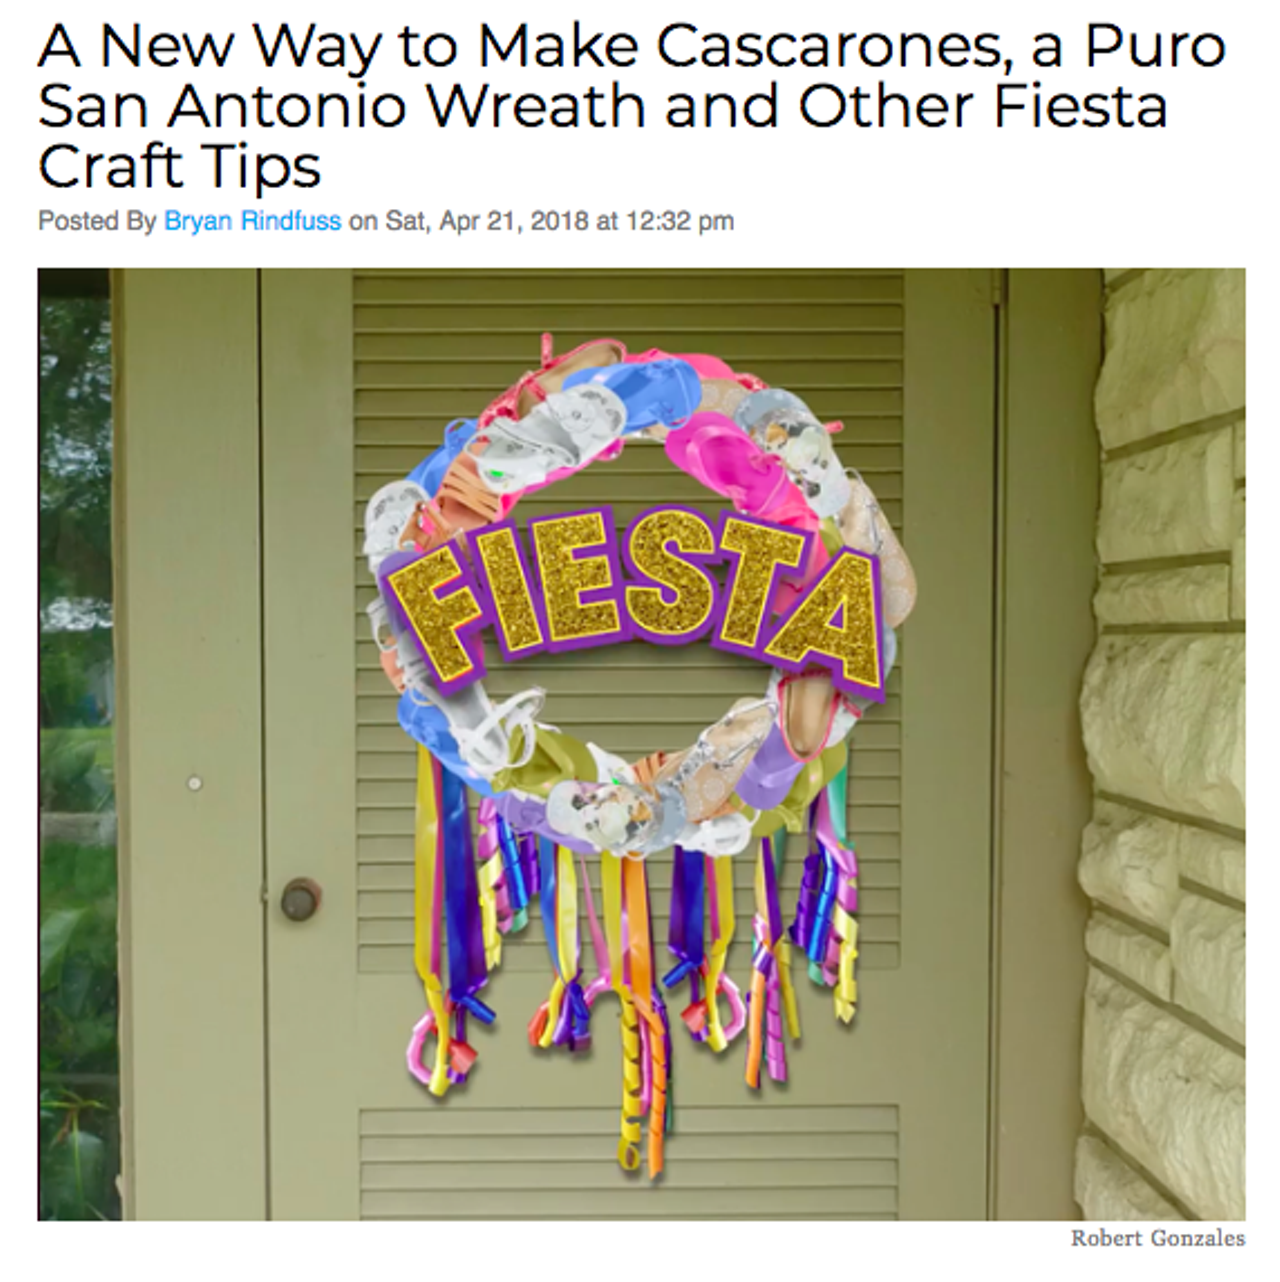 Fiesta Janie and all her tips are seriously the epitome of puro. Read more.